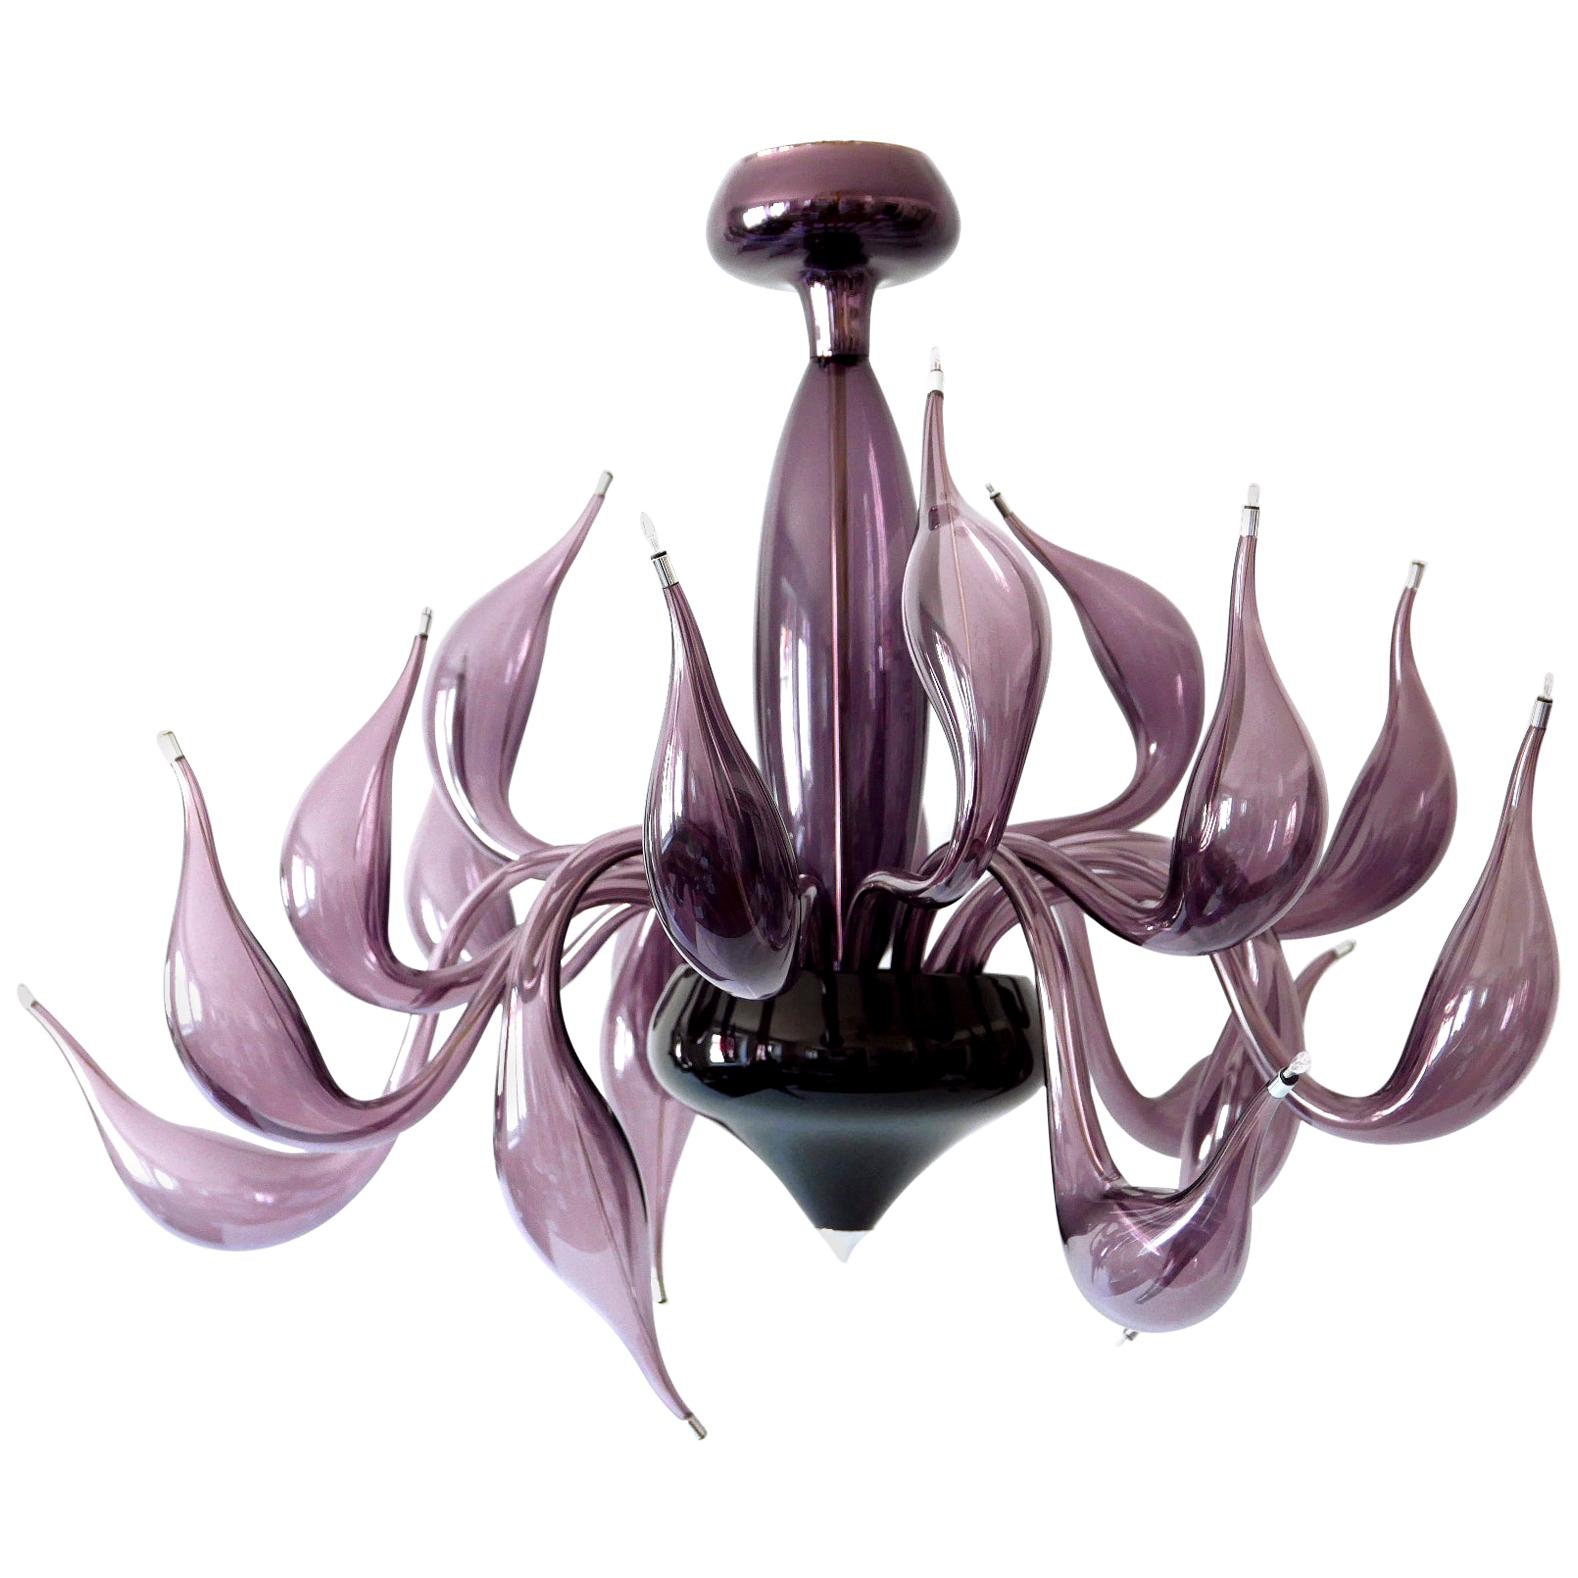 Sculptural Lu Murano Chandelier 18 Lights by Fabio Fornasier, 2004, Italy For Sale